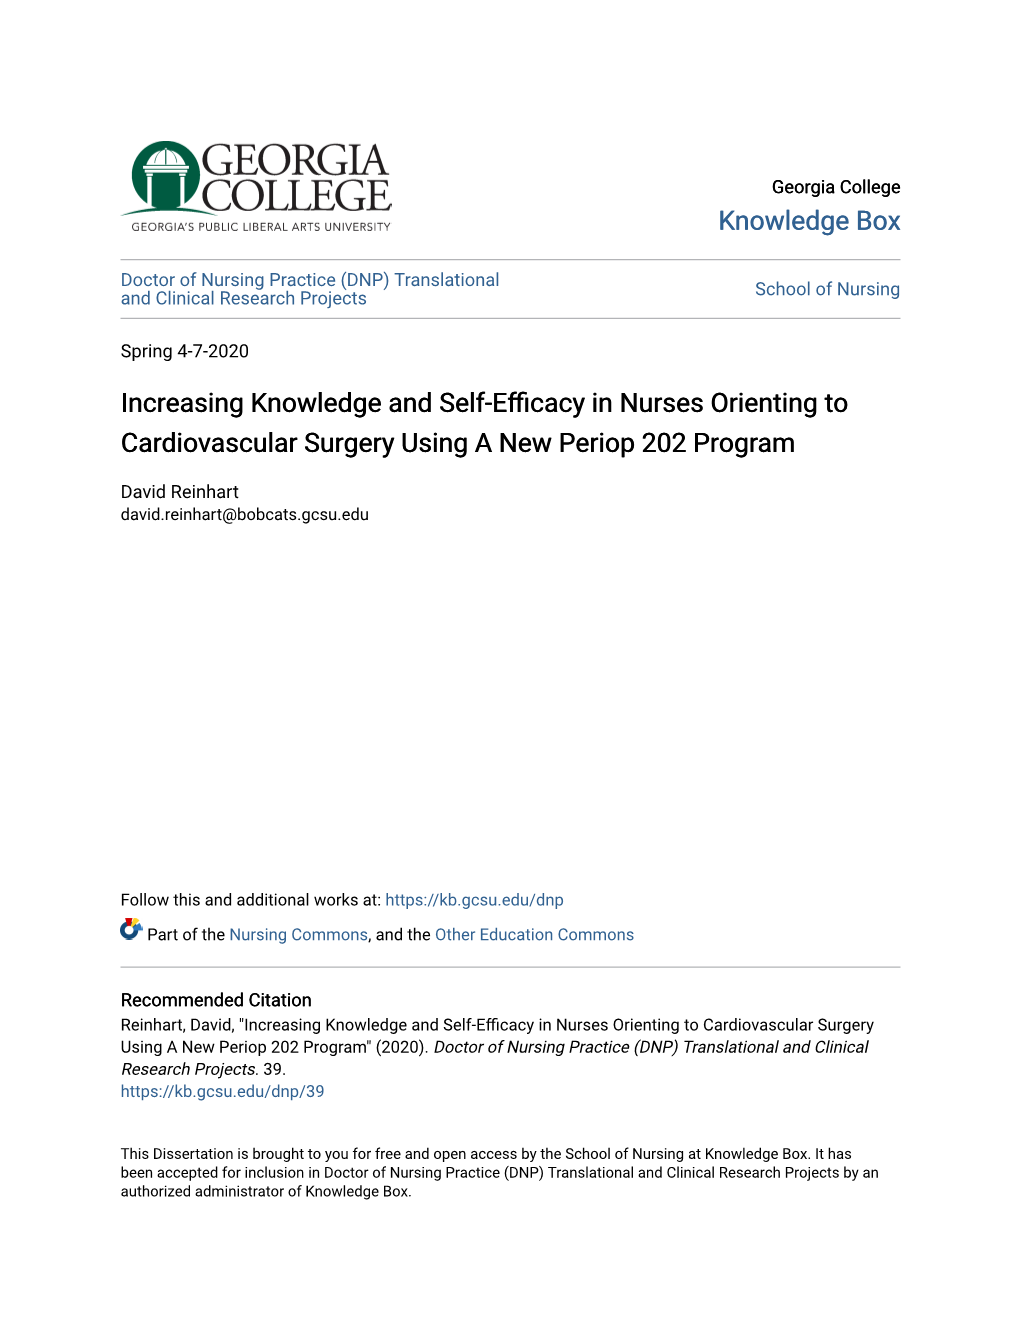 Increasing Knowledge and Self-Efficacy in Nurses Orienting to Cardiovascular Surgery